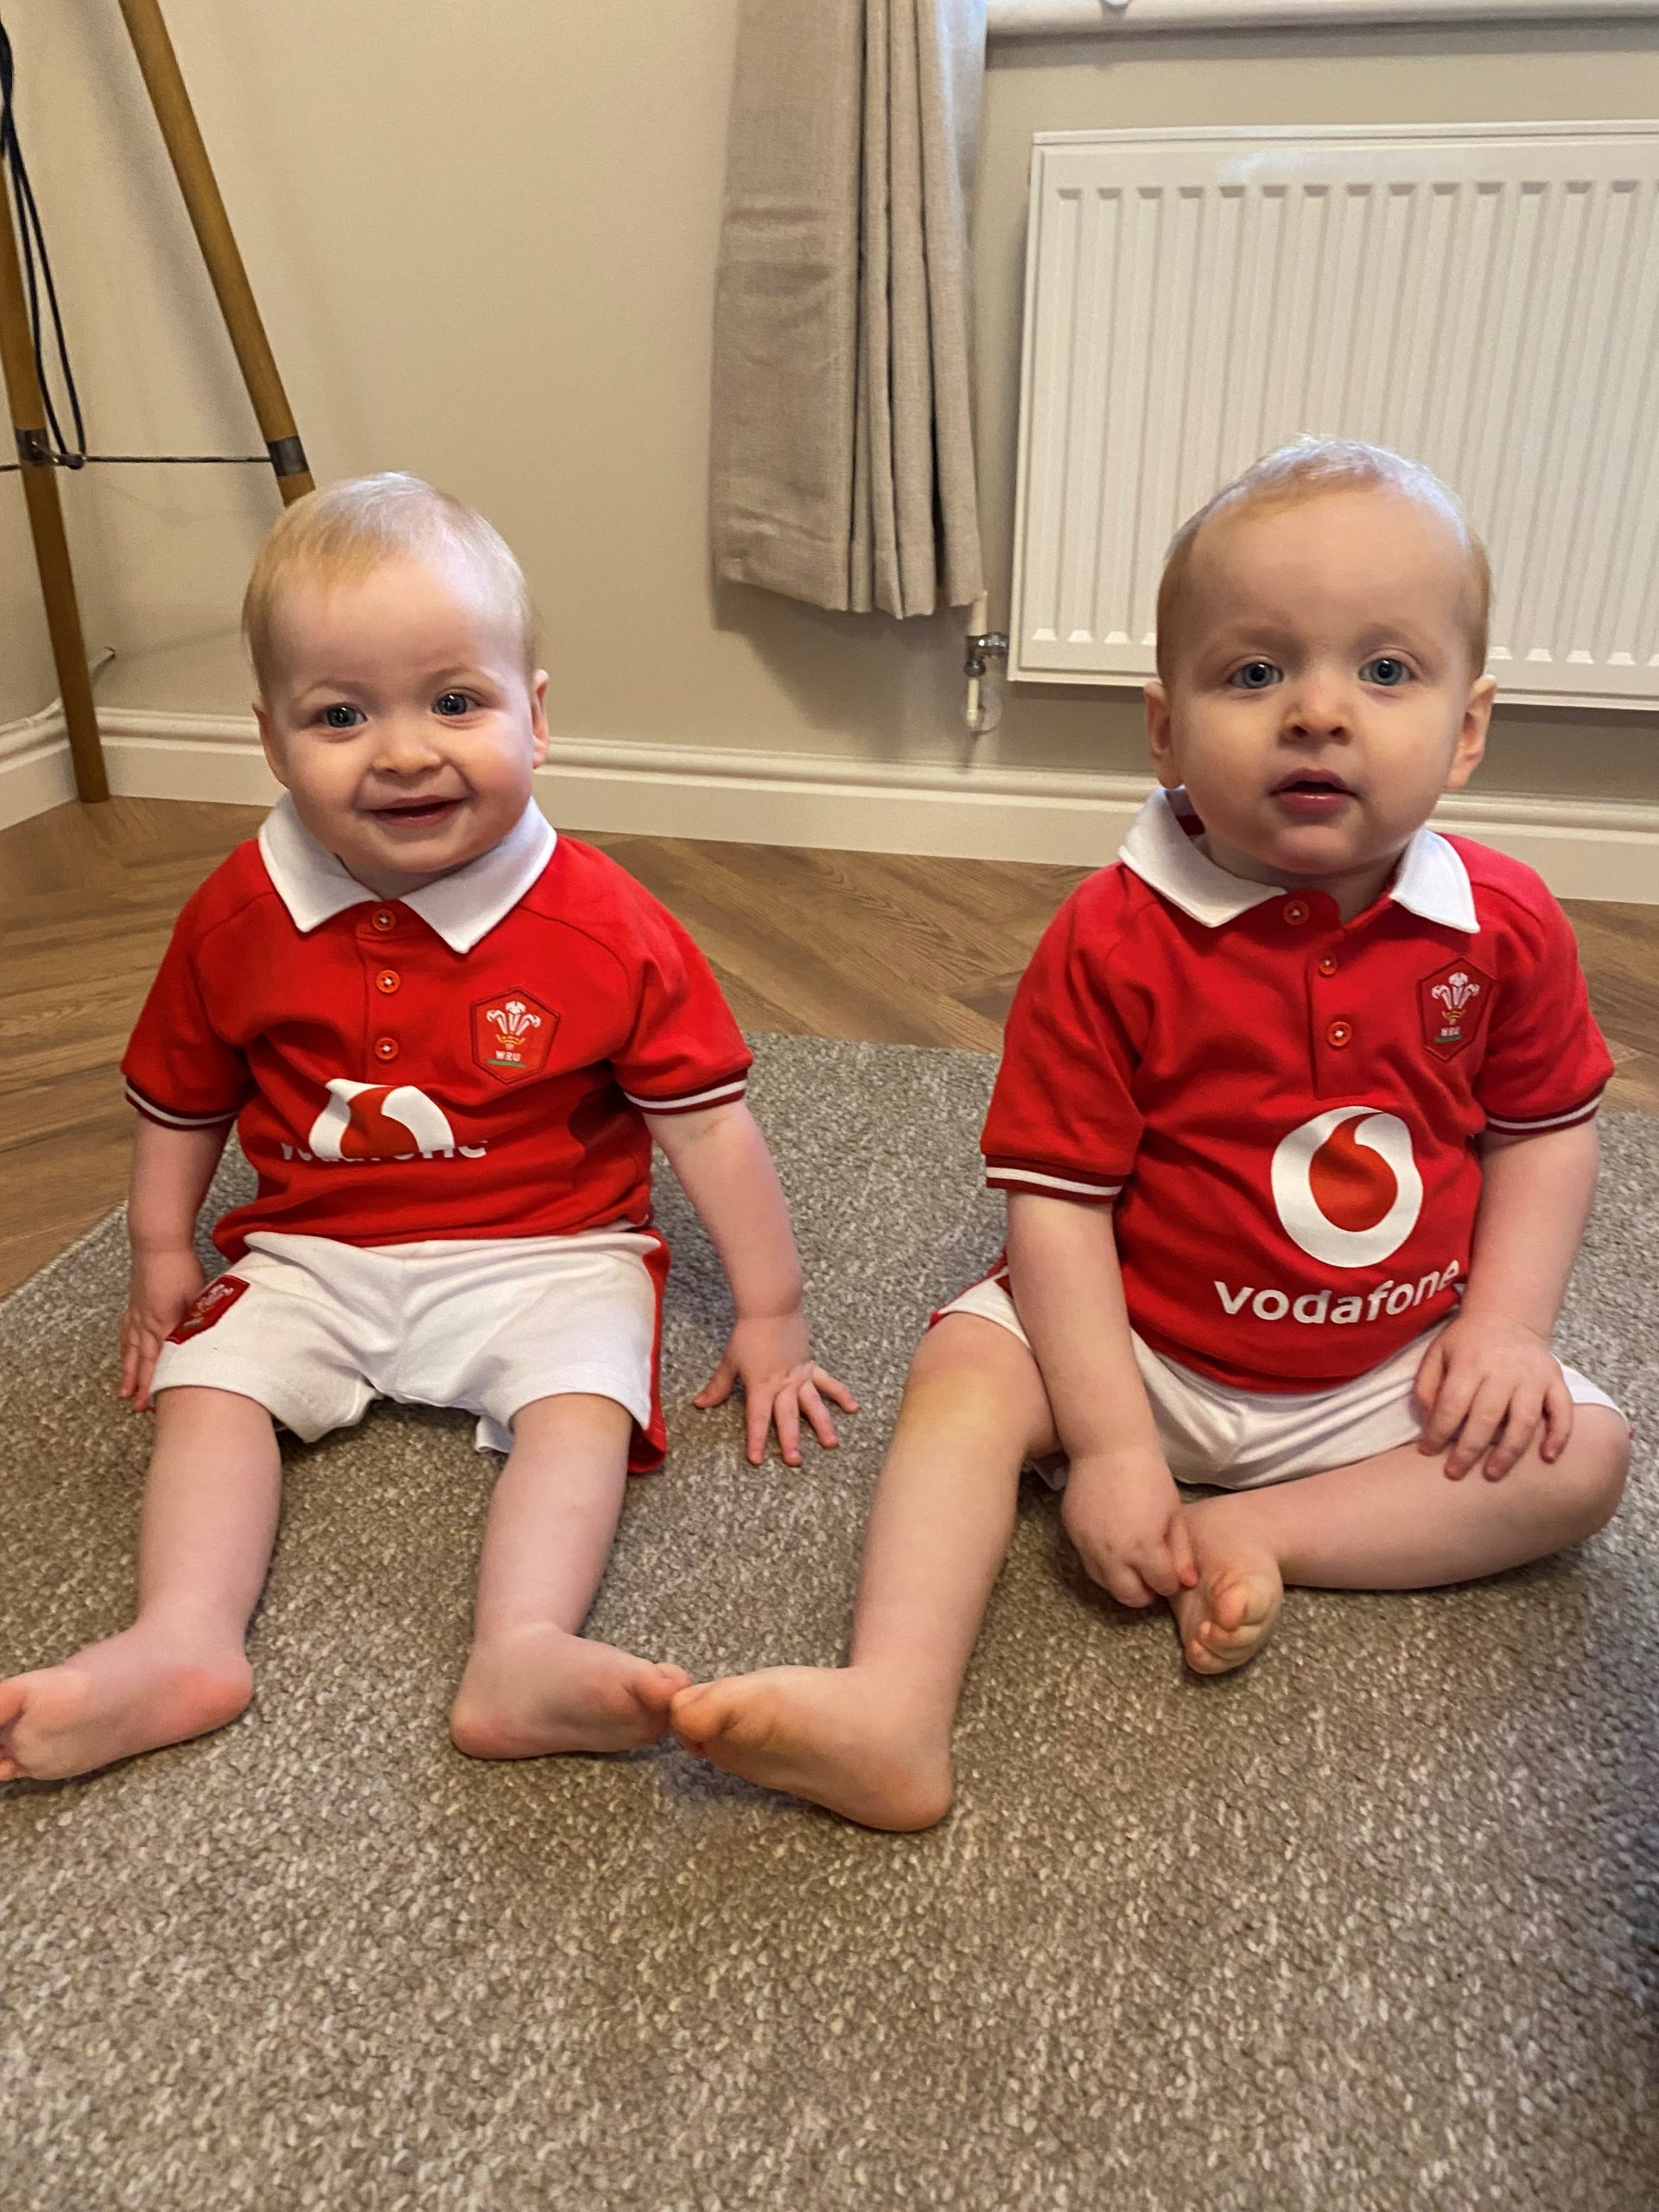 Mother of twins urges more people to become lifesaving blood donors.